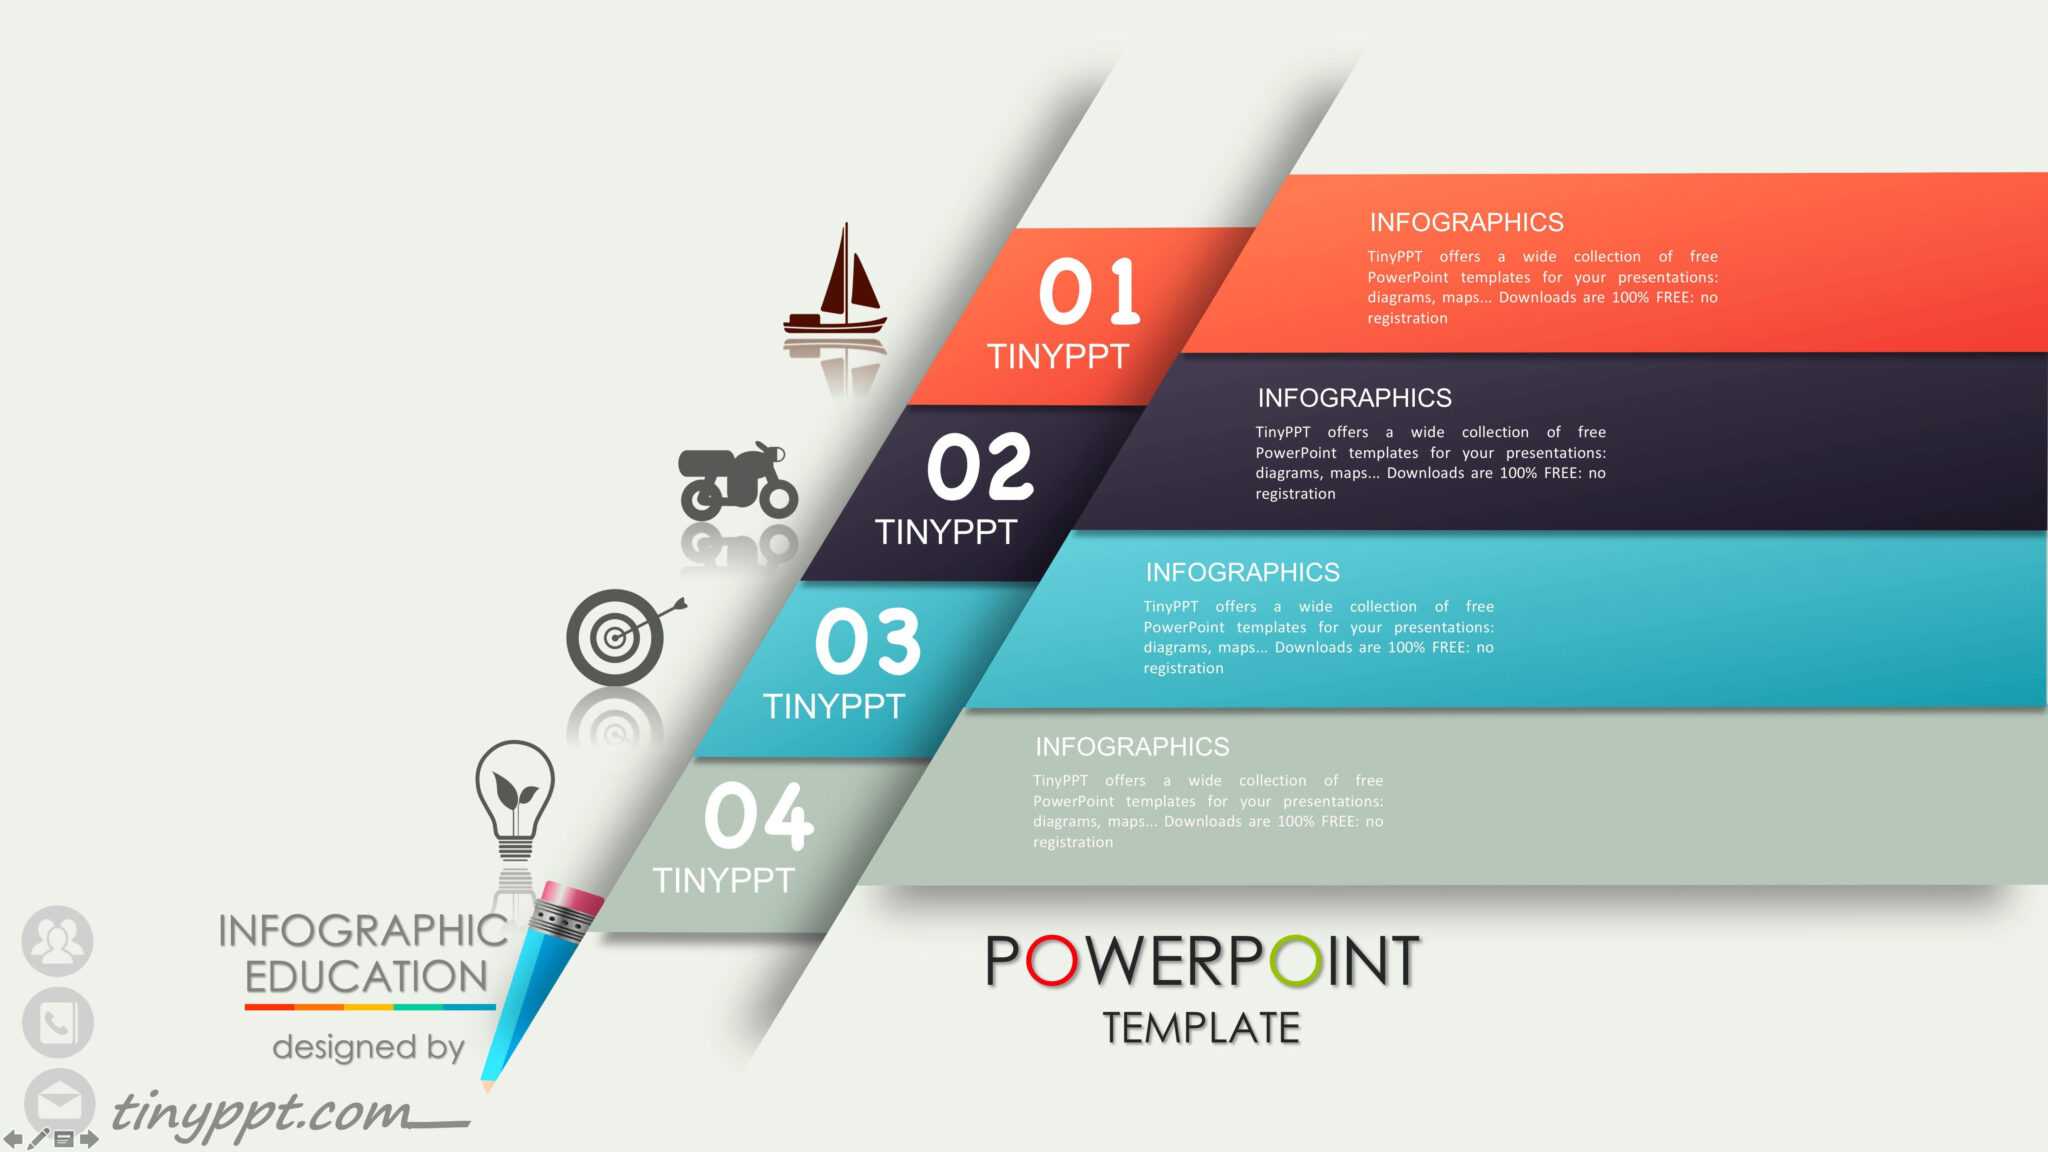 microsoft office powerpoint templates free download 2013